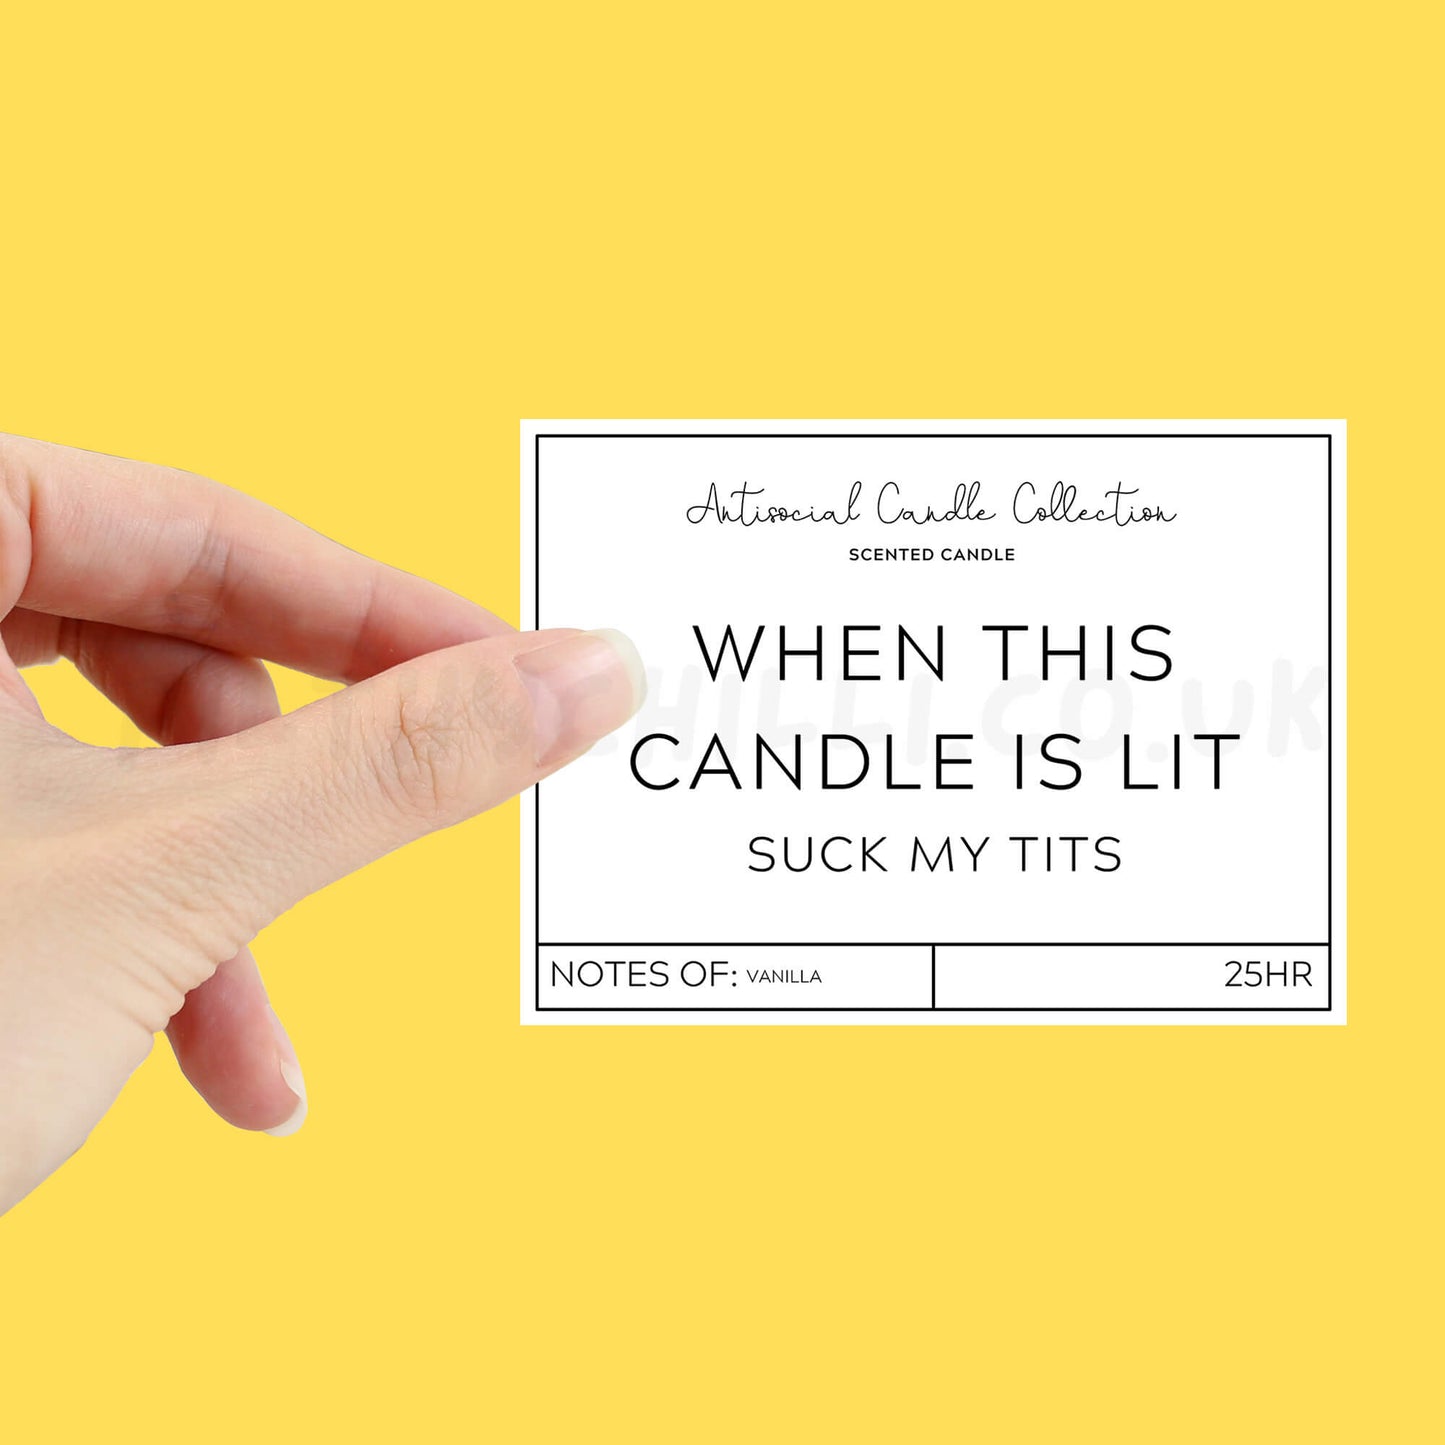 When this candle is lit suck my tits candle label